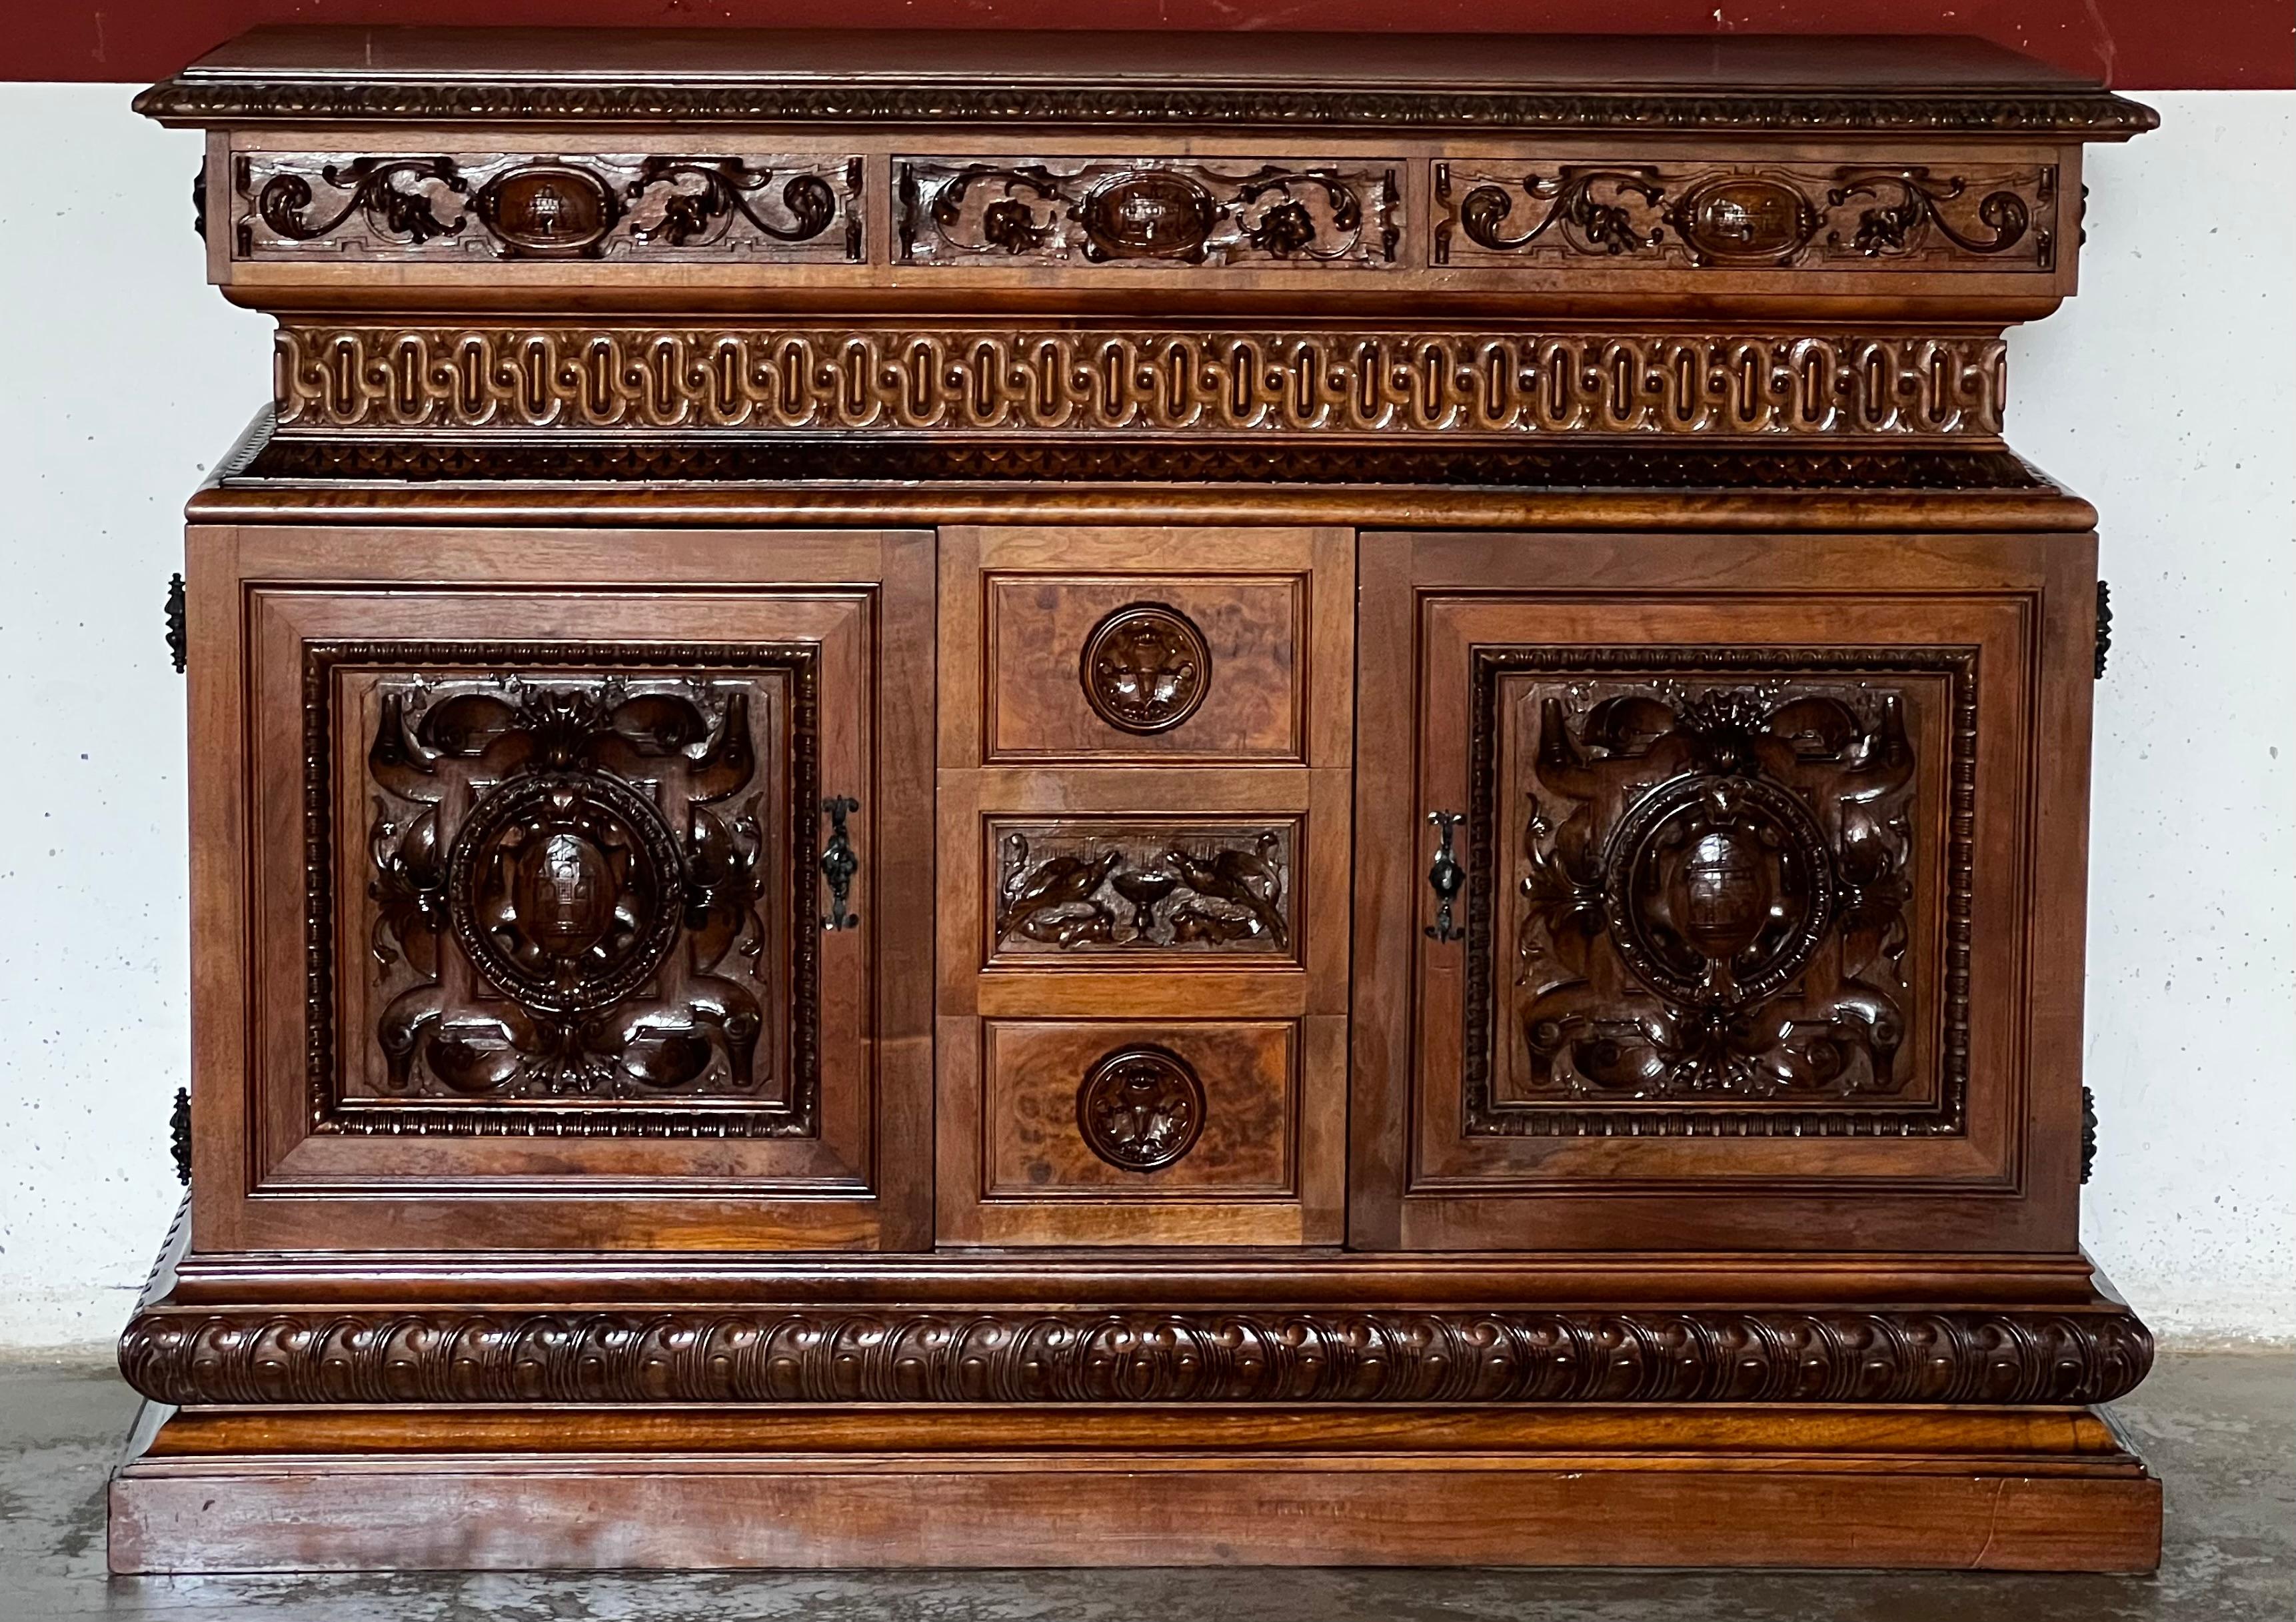 Entirely made of walnut carved with great artistic quality. Large edges adorn the front of the furniture. Very many volutes and curls carved in the wood especially in the doors. Each panel of furniture presents a work of quality carving with floral